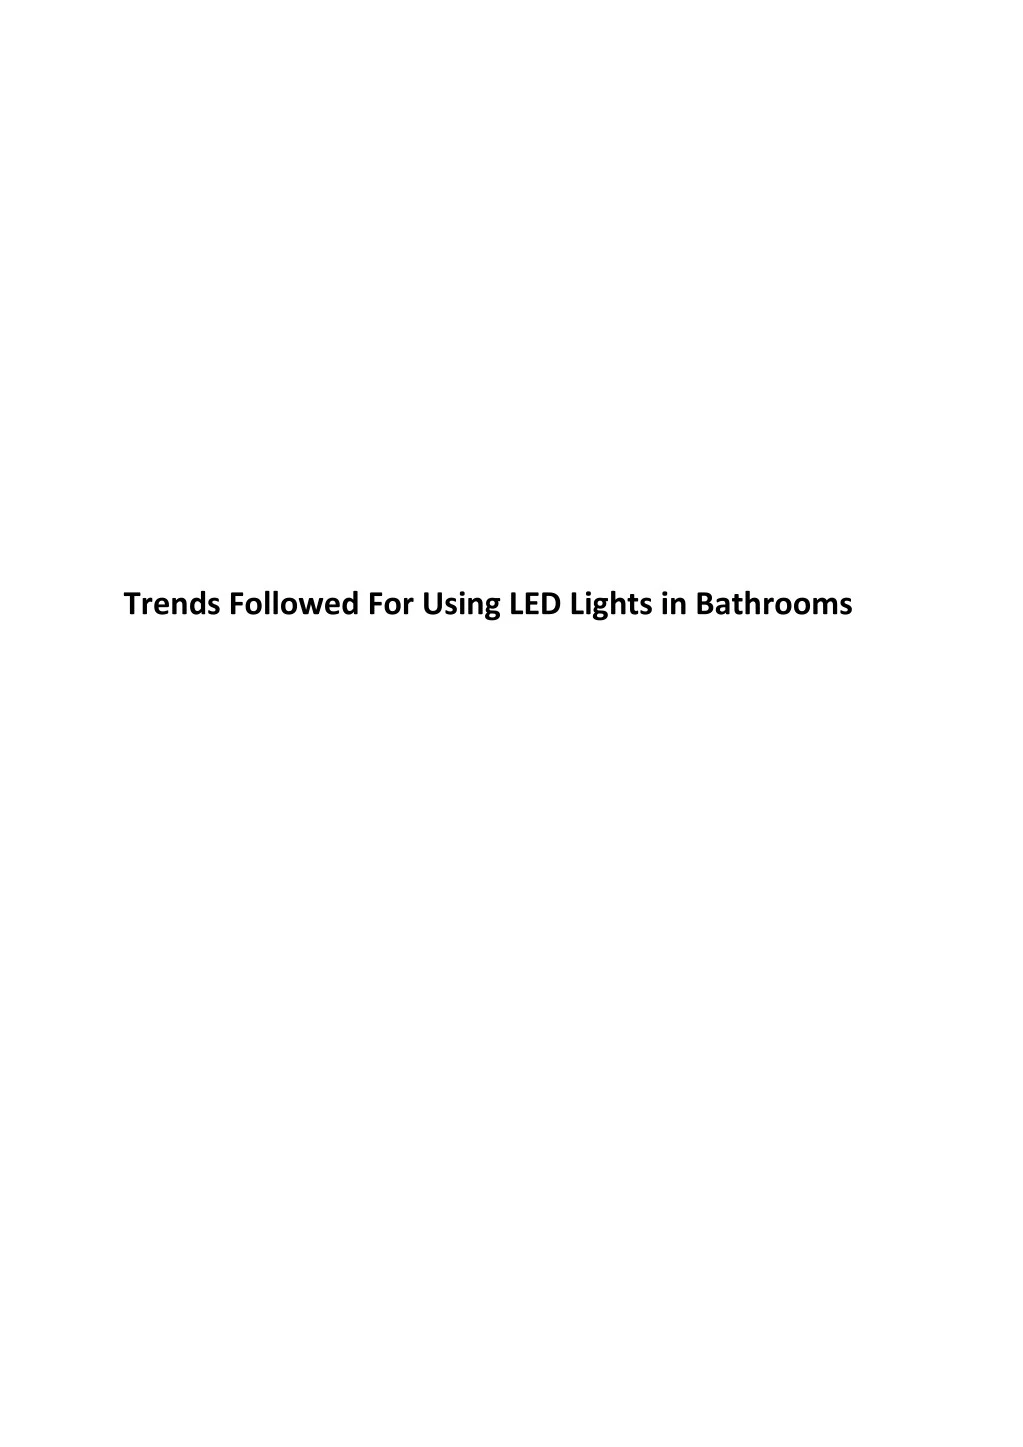 trends followed for using led lights in bathrooms